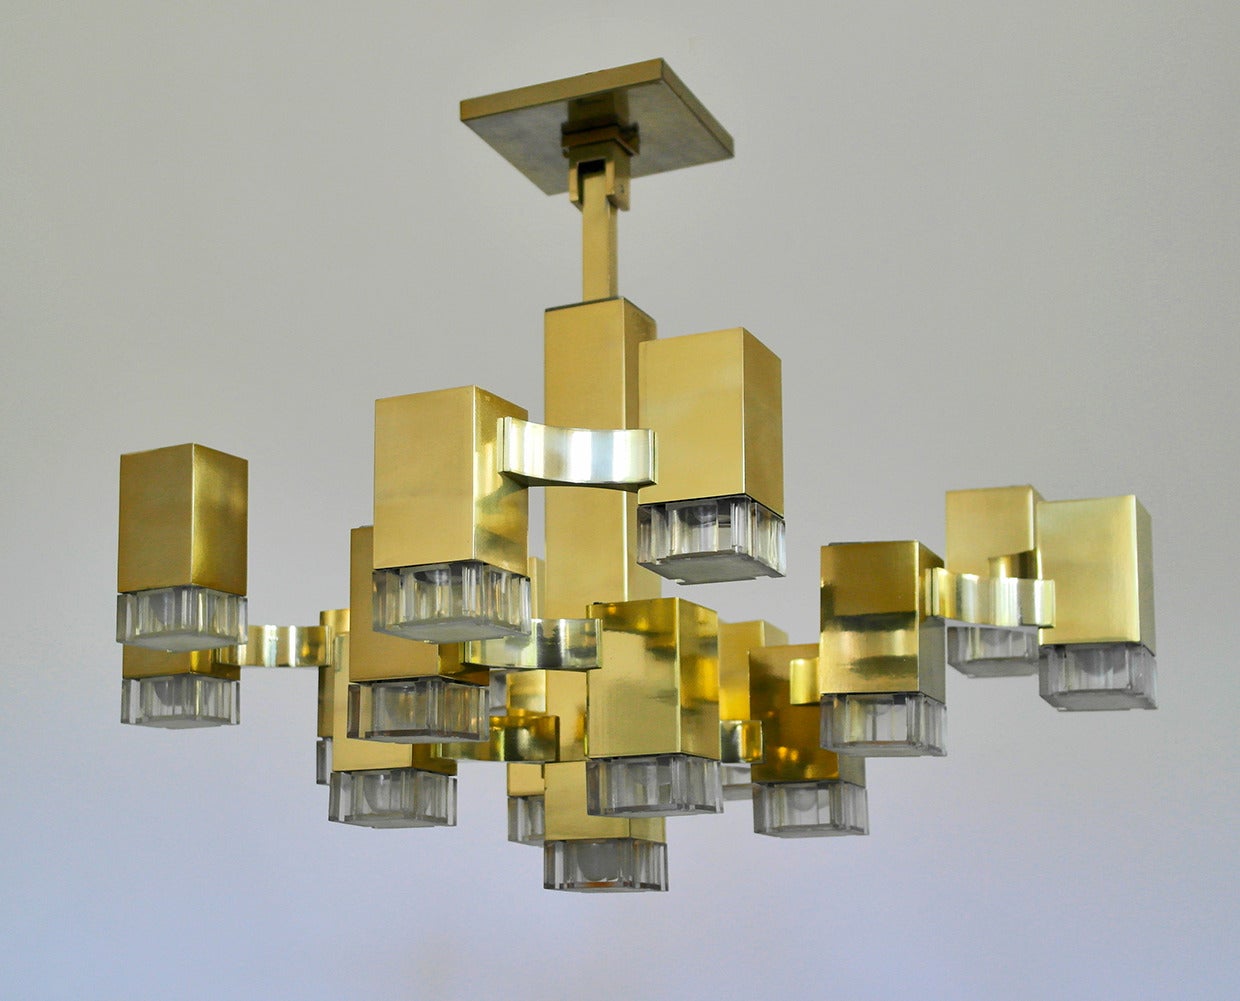 Brass and glass iconic cube design chandelier by Gaetano Sciolari - 3 pieces available.